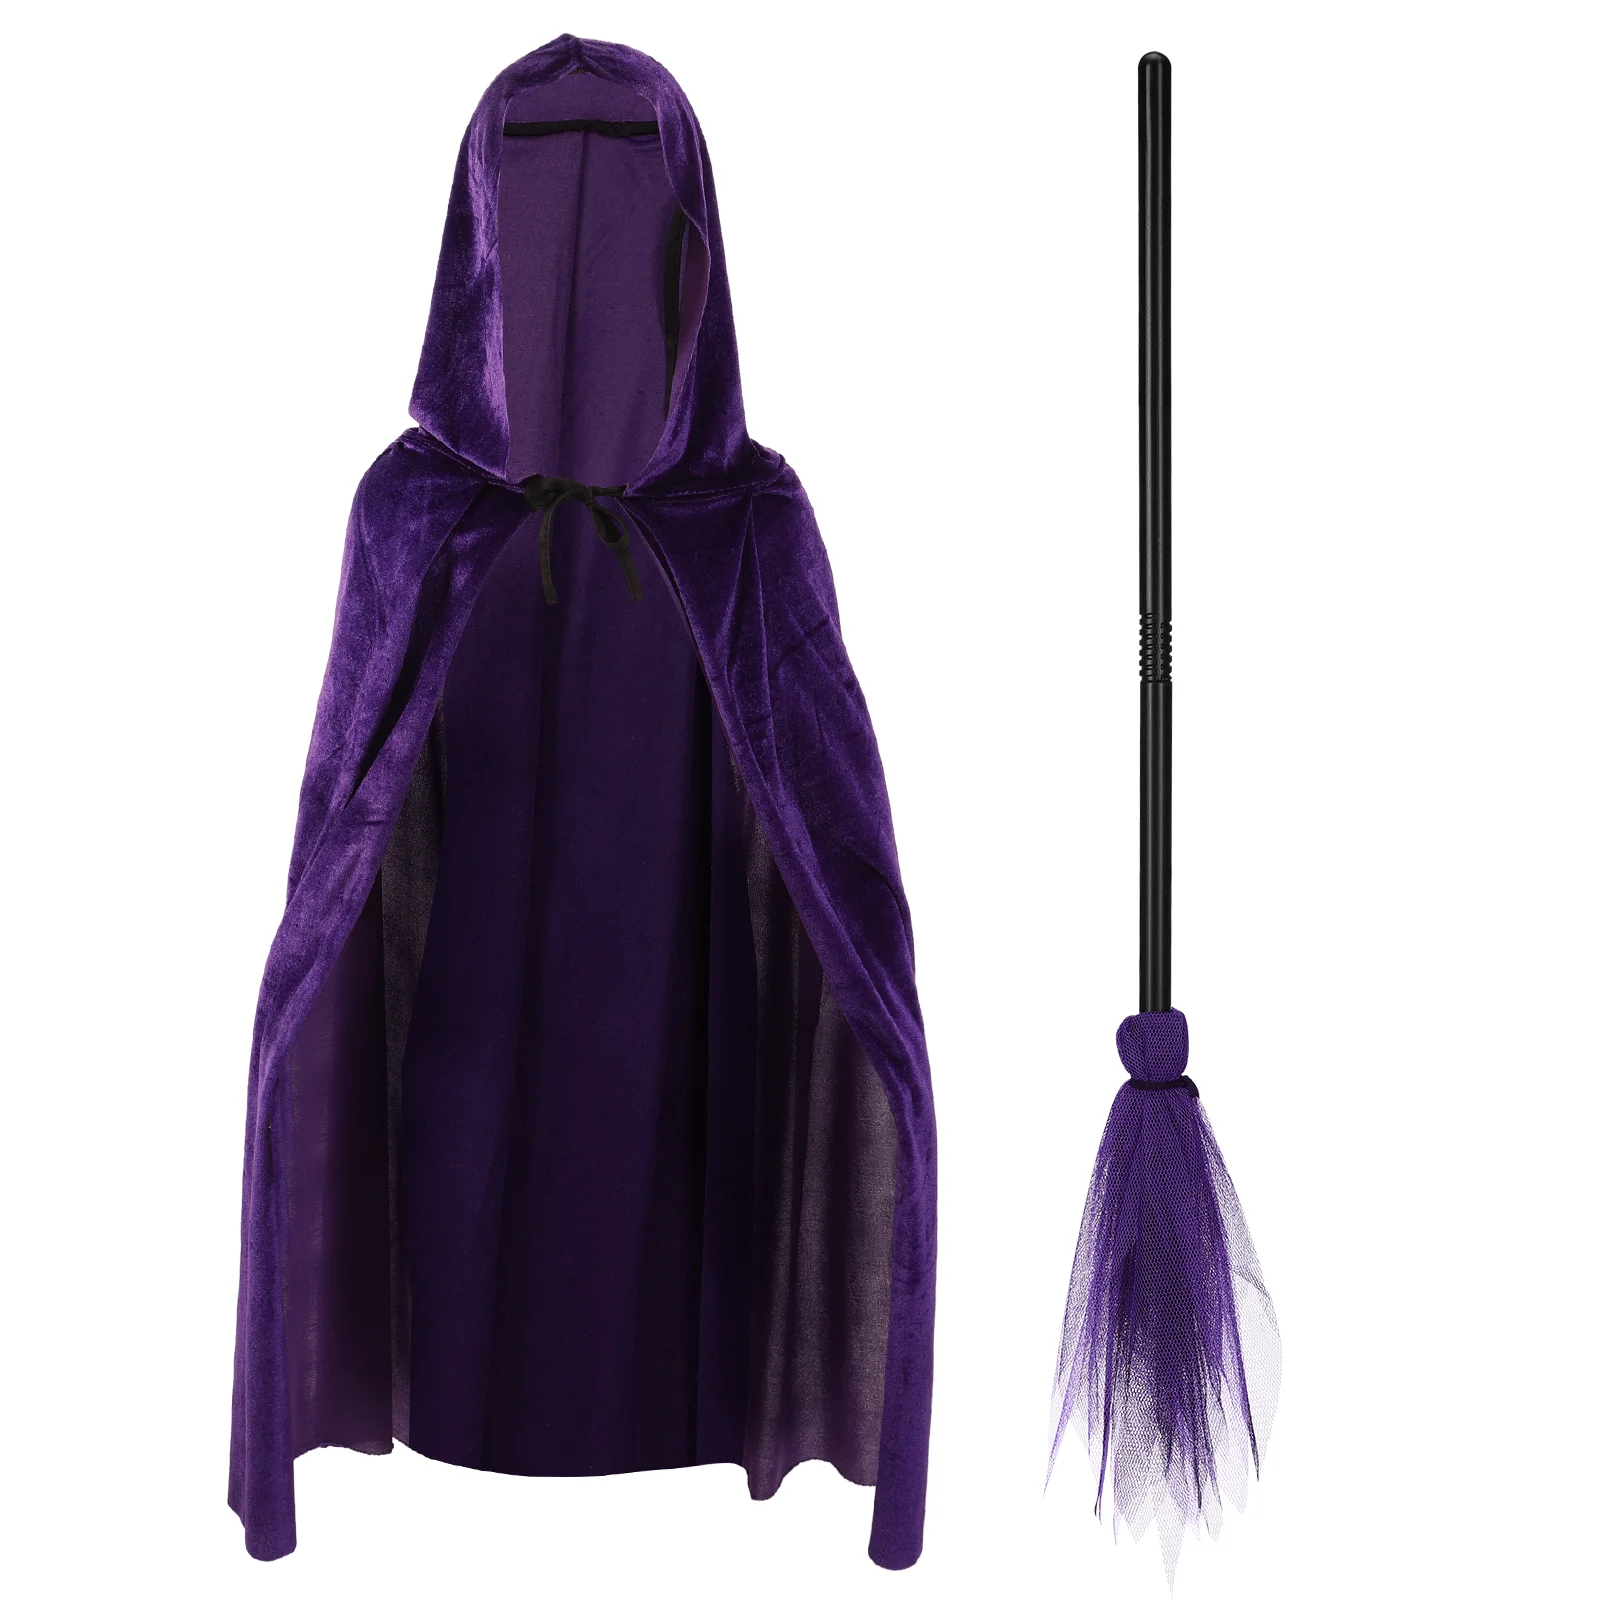 

Kids Costumes Capes Halloween Witch Cloak Velvet Cape With Hooded Broom Hooded Cloak Halloween Party Cosplay